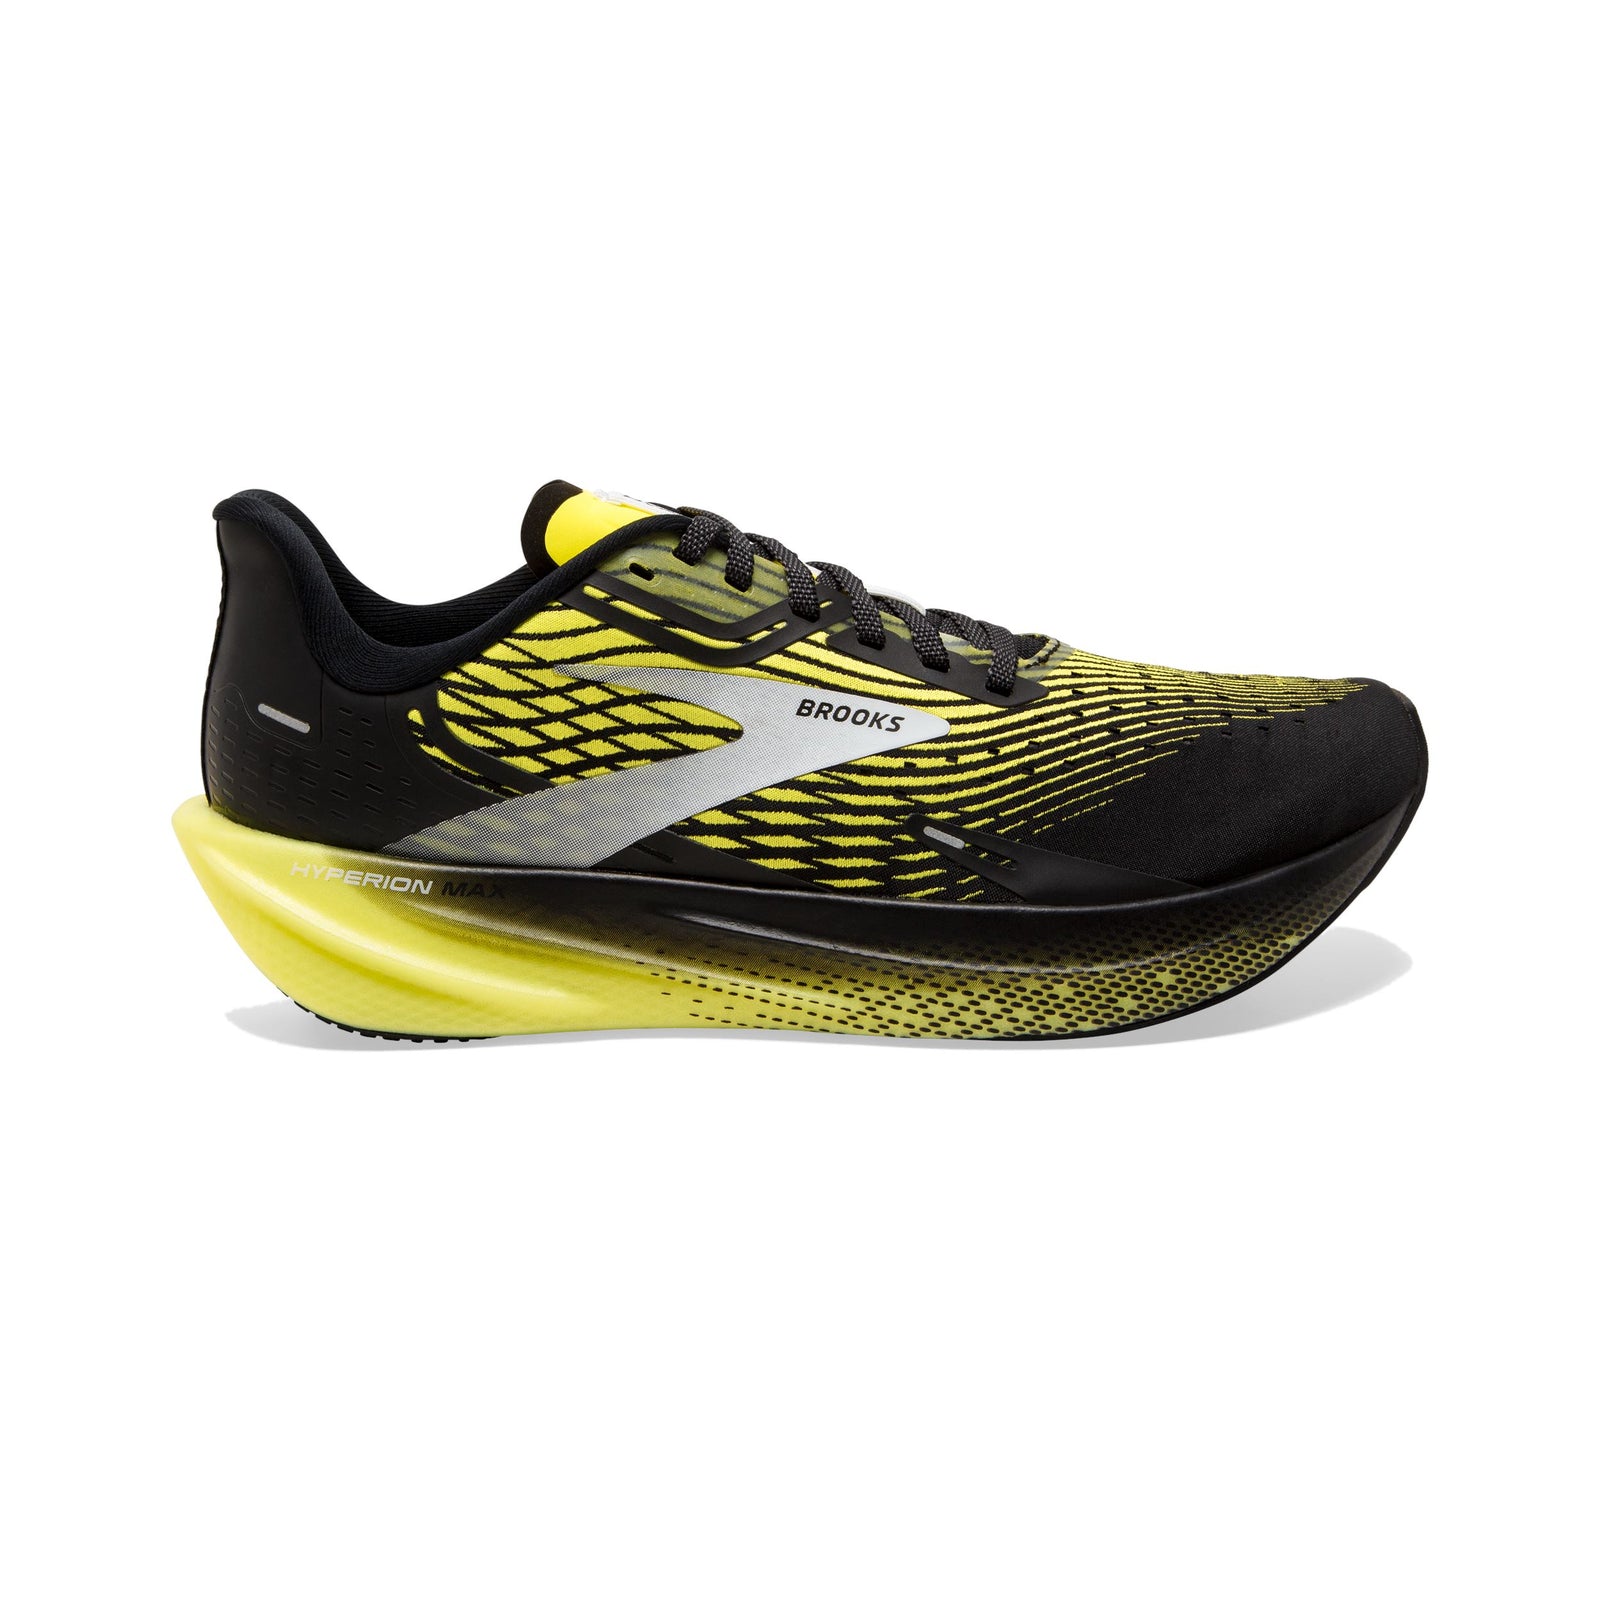 Brooks Men's Hyperion Max Road Running Shoes Black/Blazing Yellow/White US 8.5 